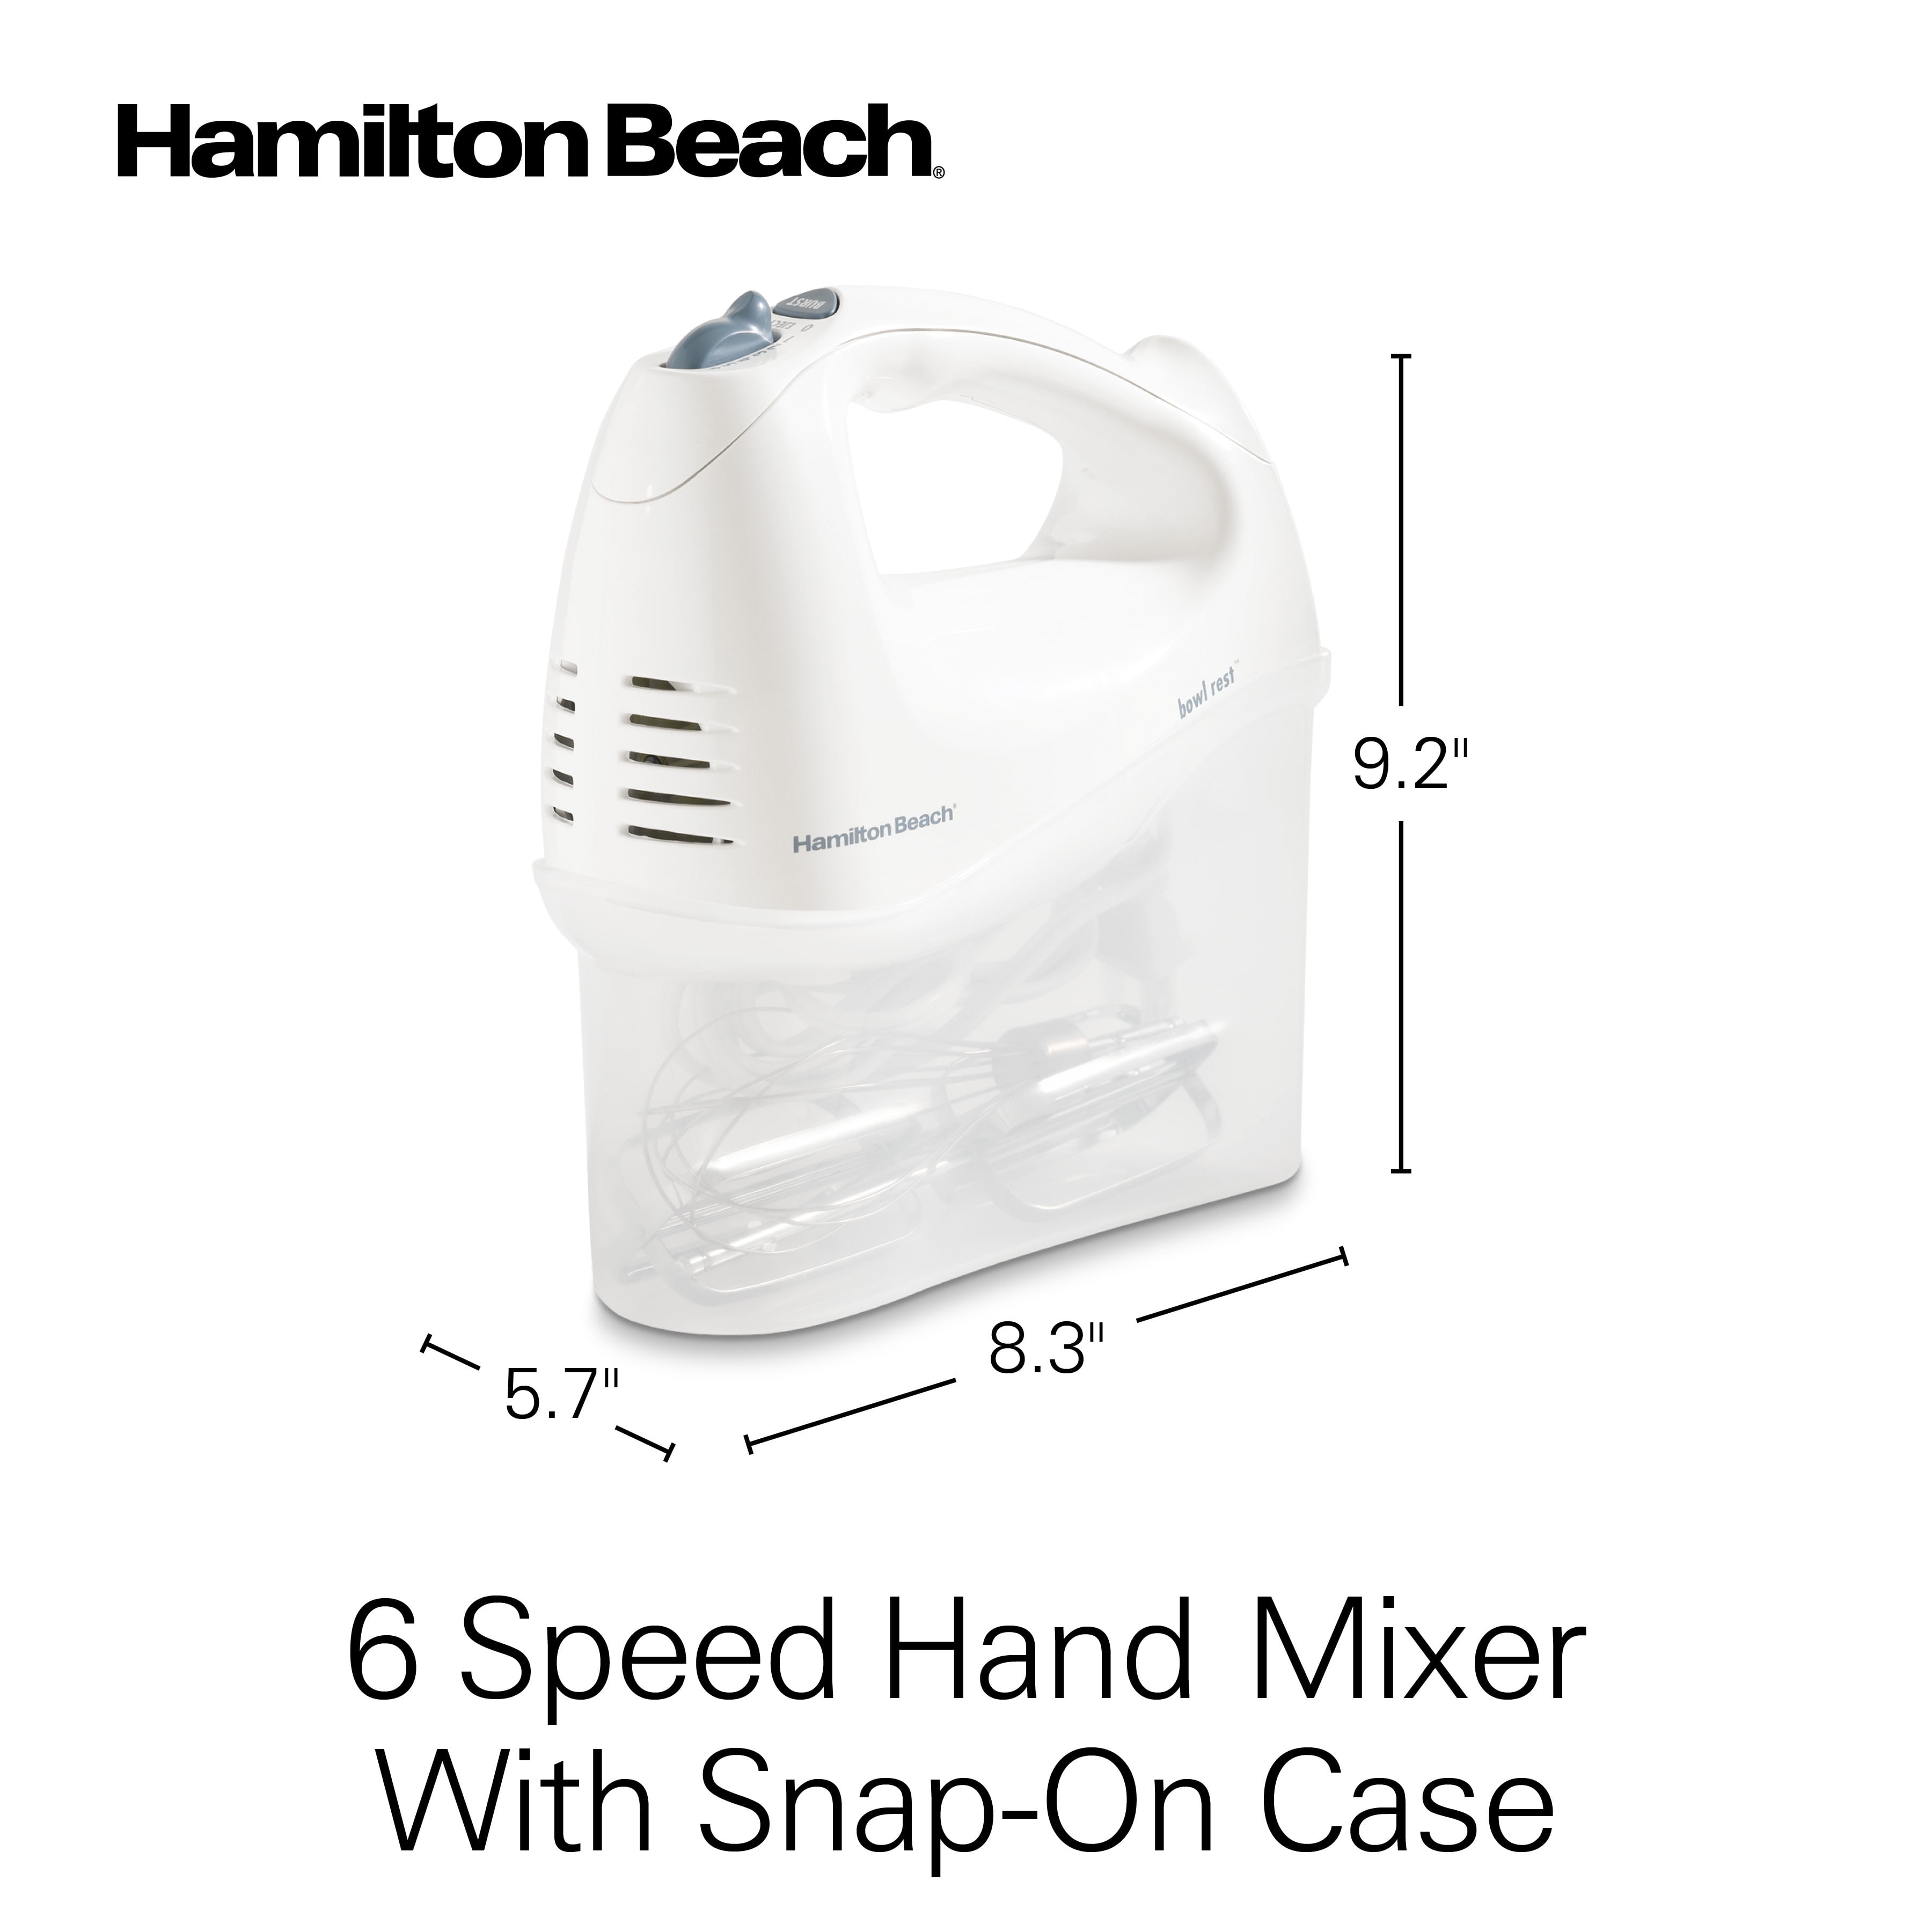 Hamilton Beach 6 Speed Electric Hand Mixer with Whisk, Traditional Beaters,  Snap-On Case, 250 Watts, White, 62682 